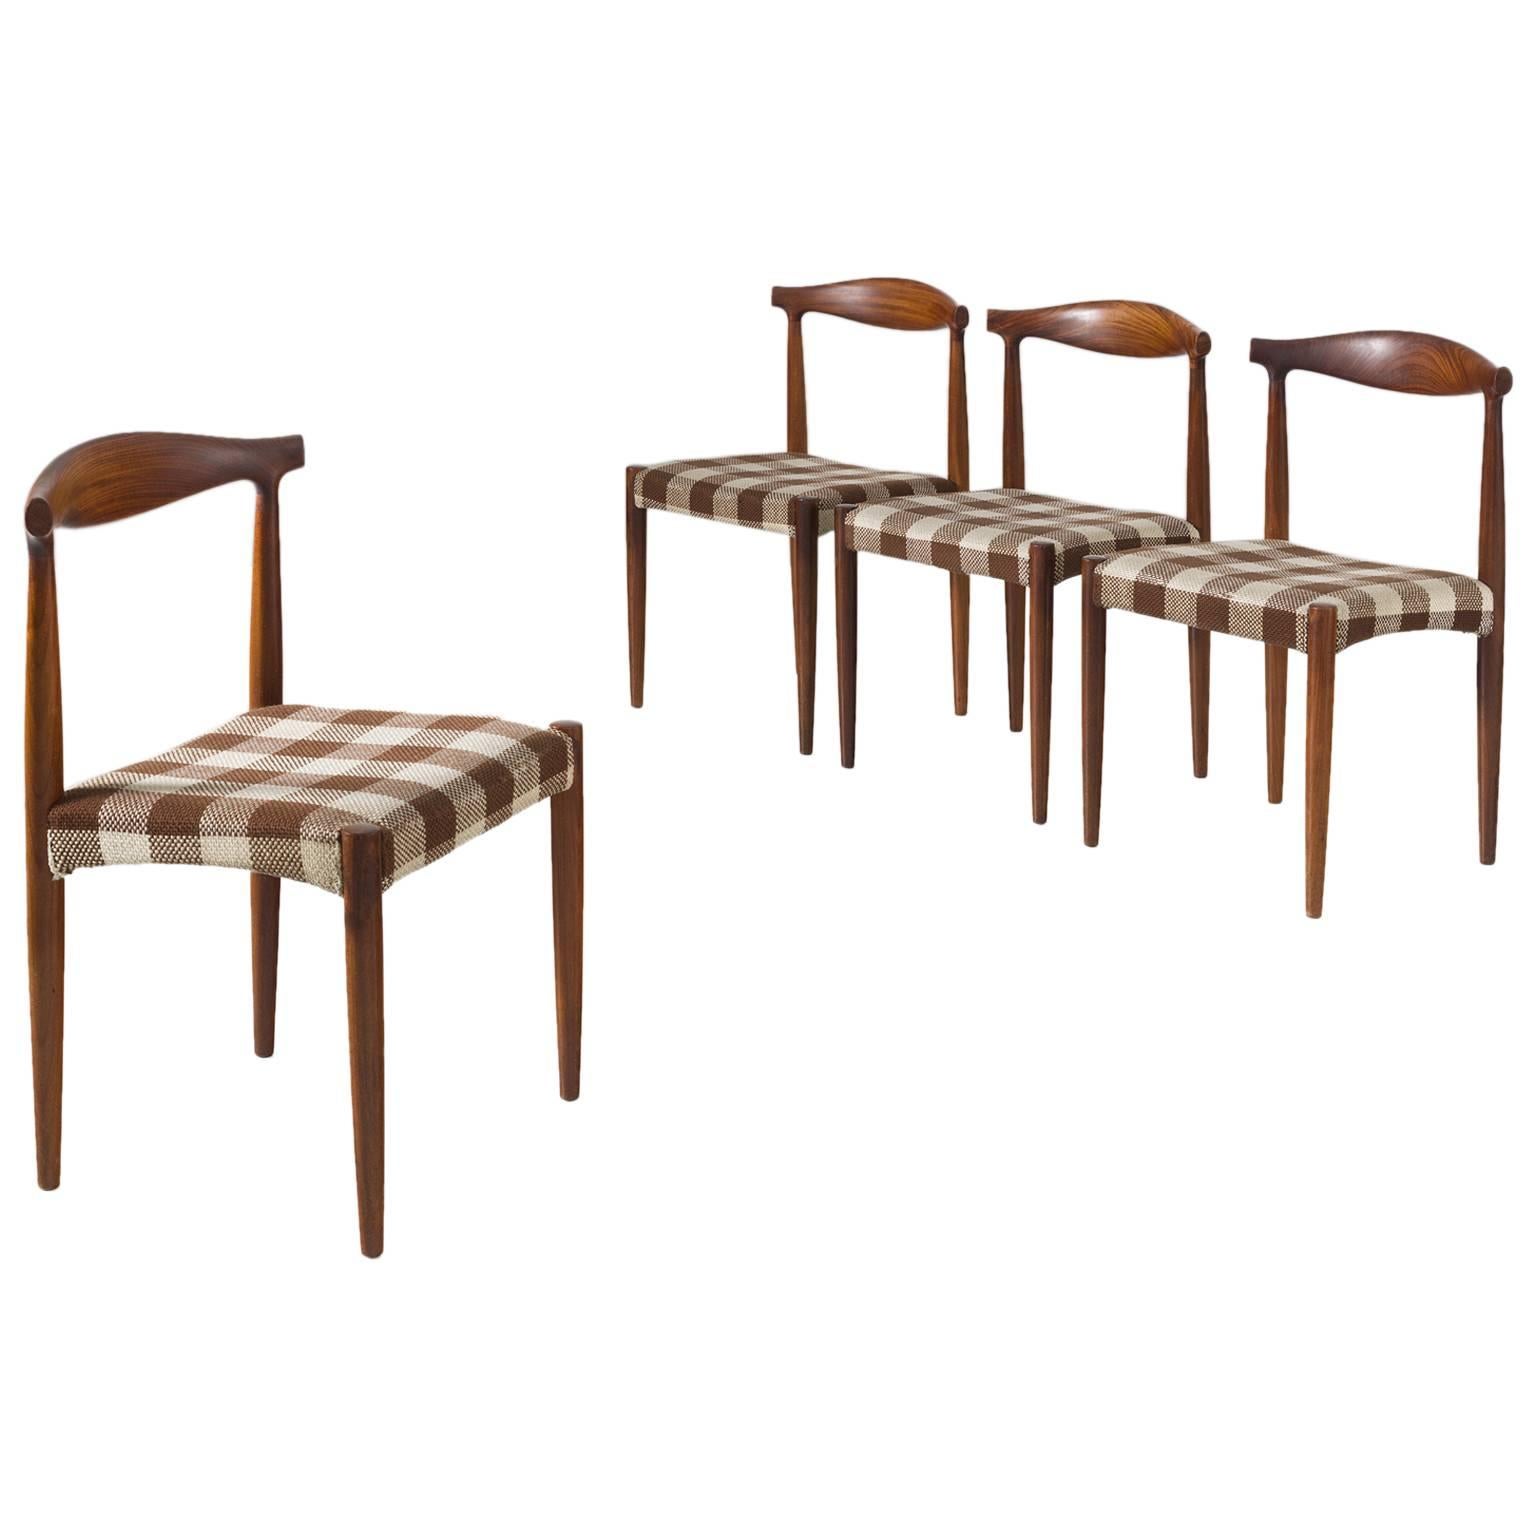 Set of Four Danish Dining Room Chairs in Rosewood